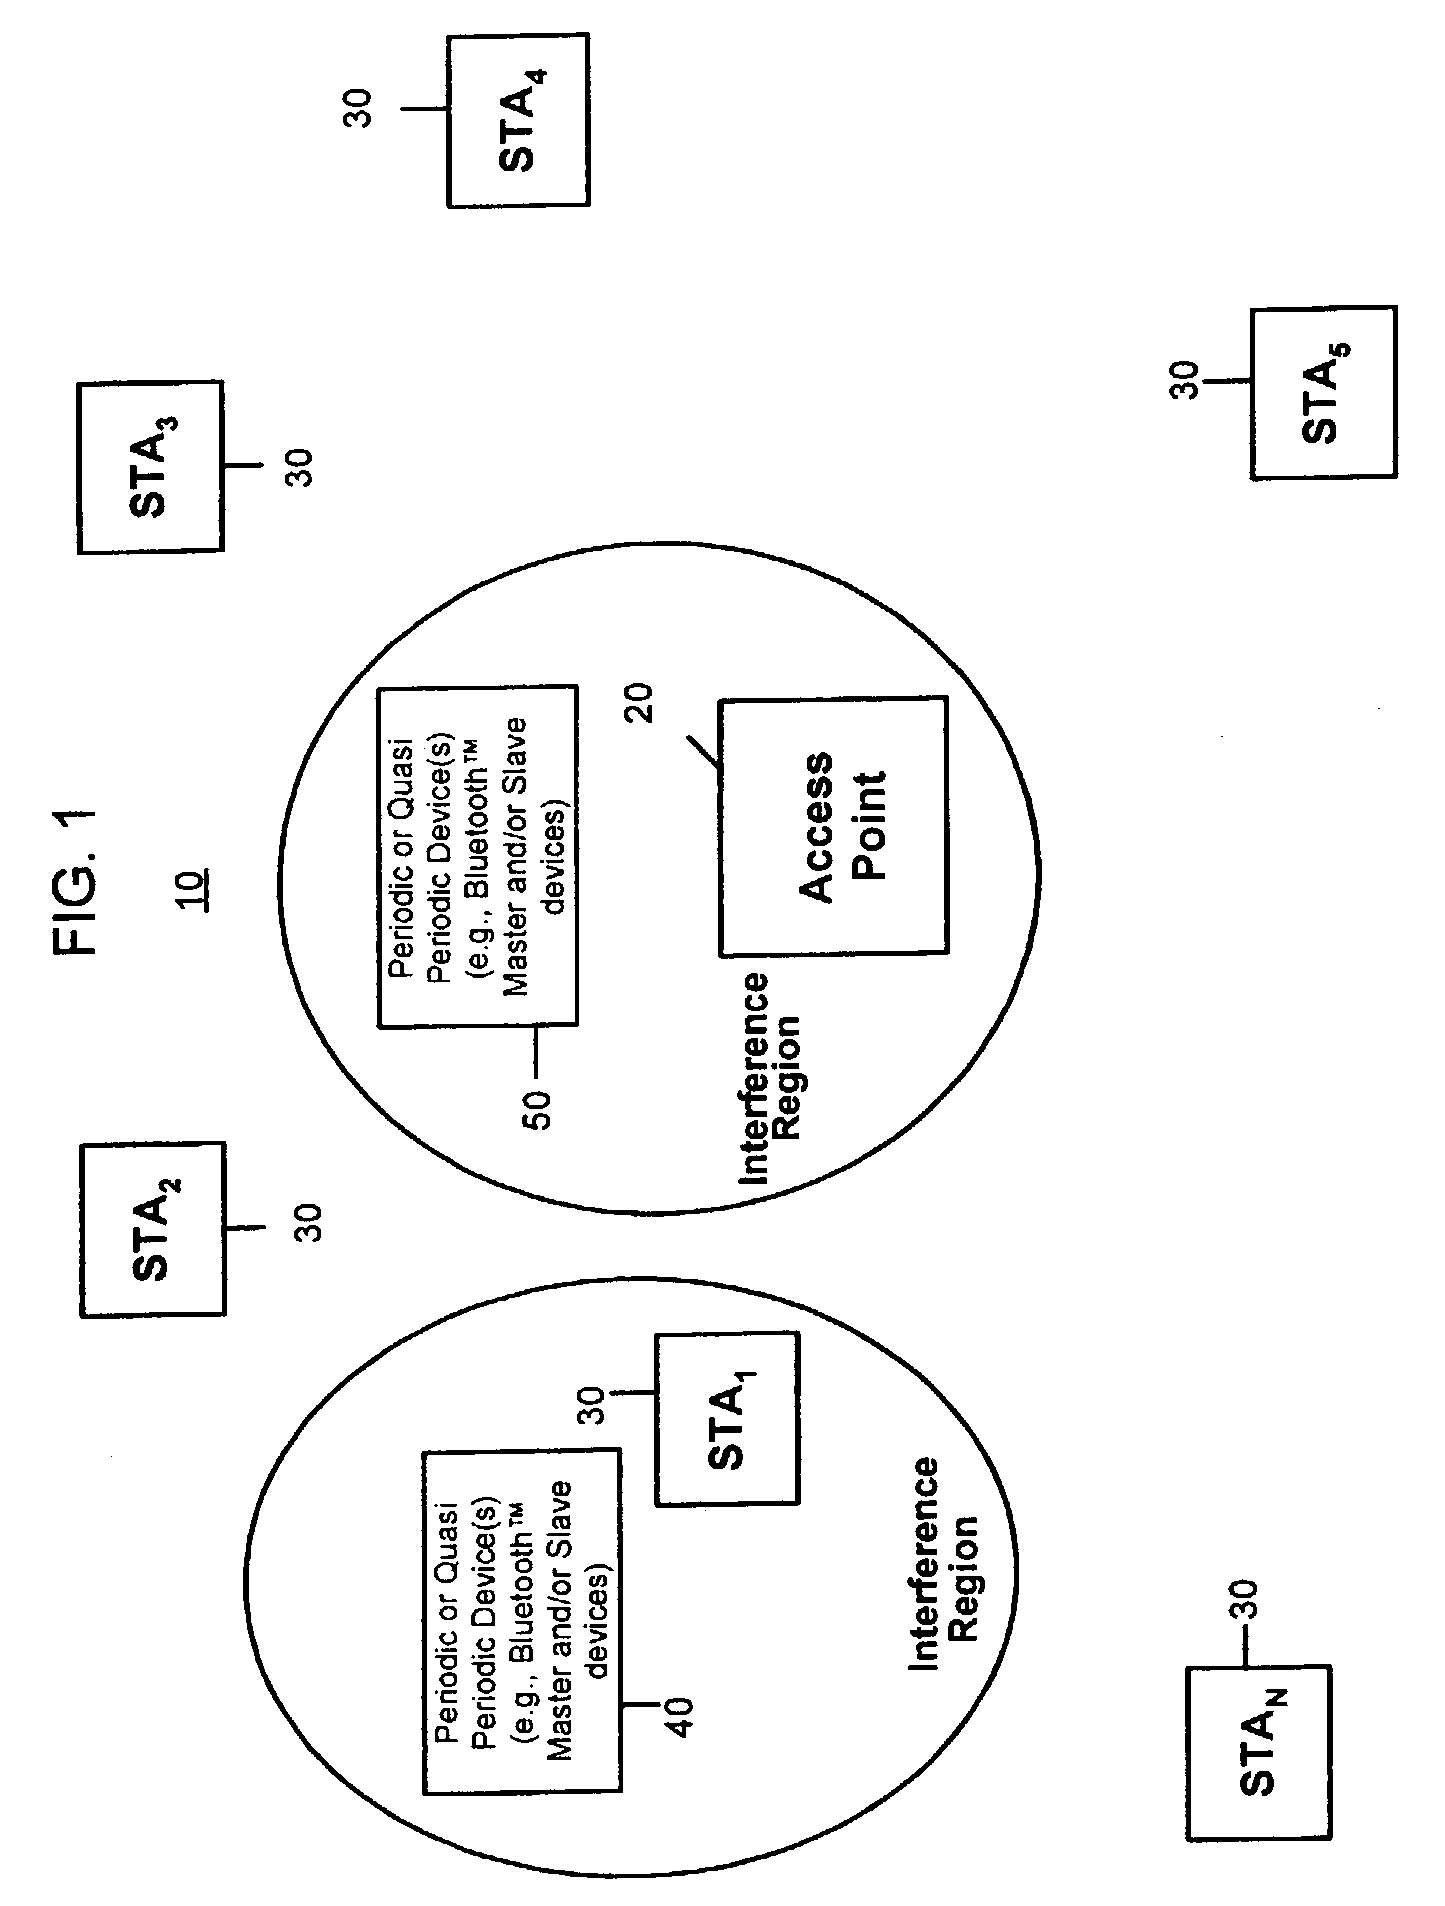 Systems and methods for interference mitigation with respect to periodic interferers in short-range wireless applications